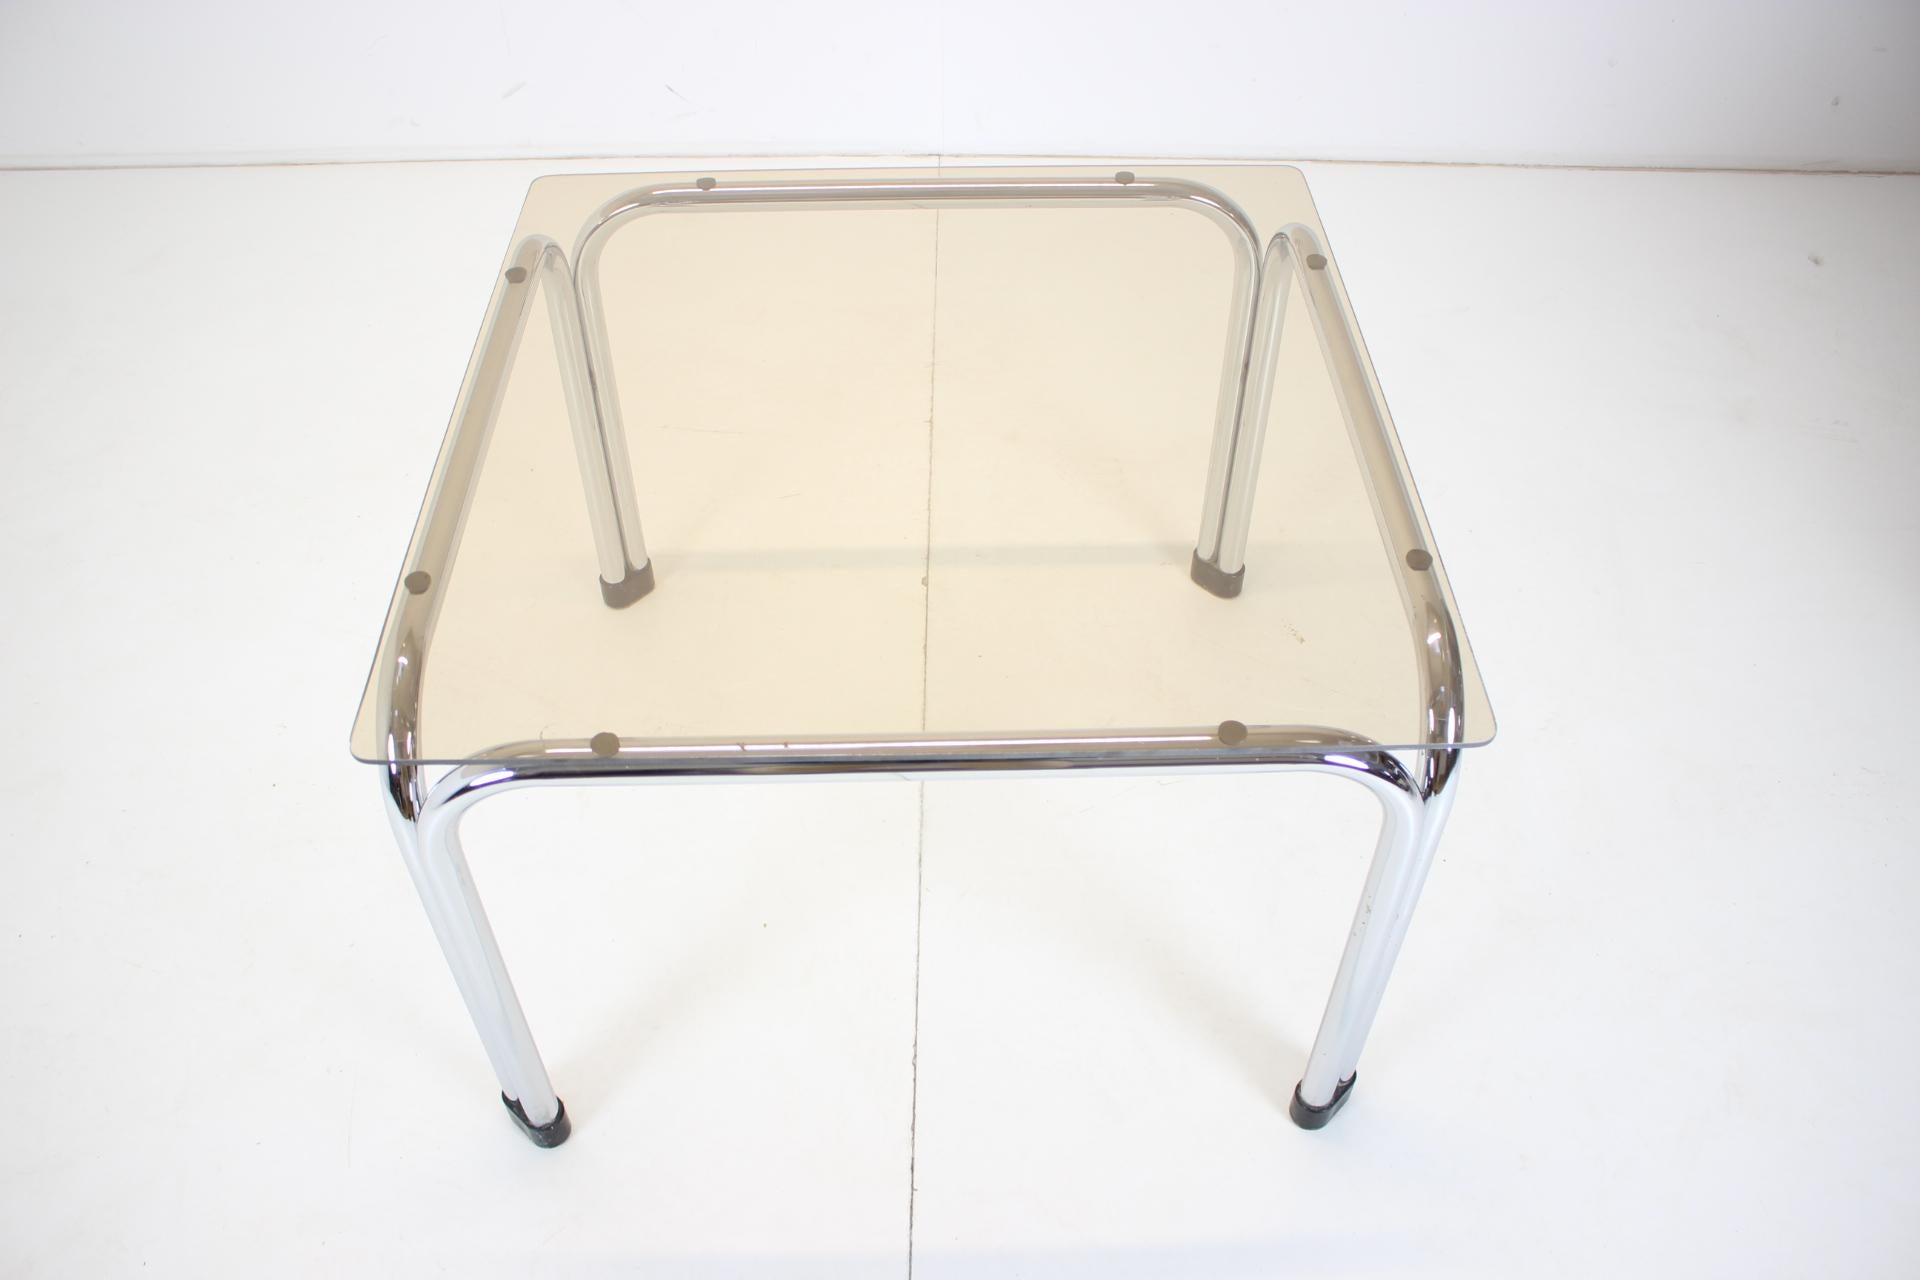 - made in Czechoslovakia
- made of metal, fabric
- dimension of table: H 53cm x W 75cm x D 75cm
- good, original condition.